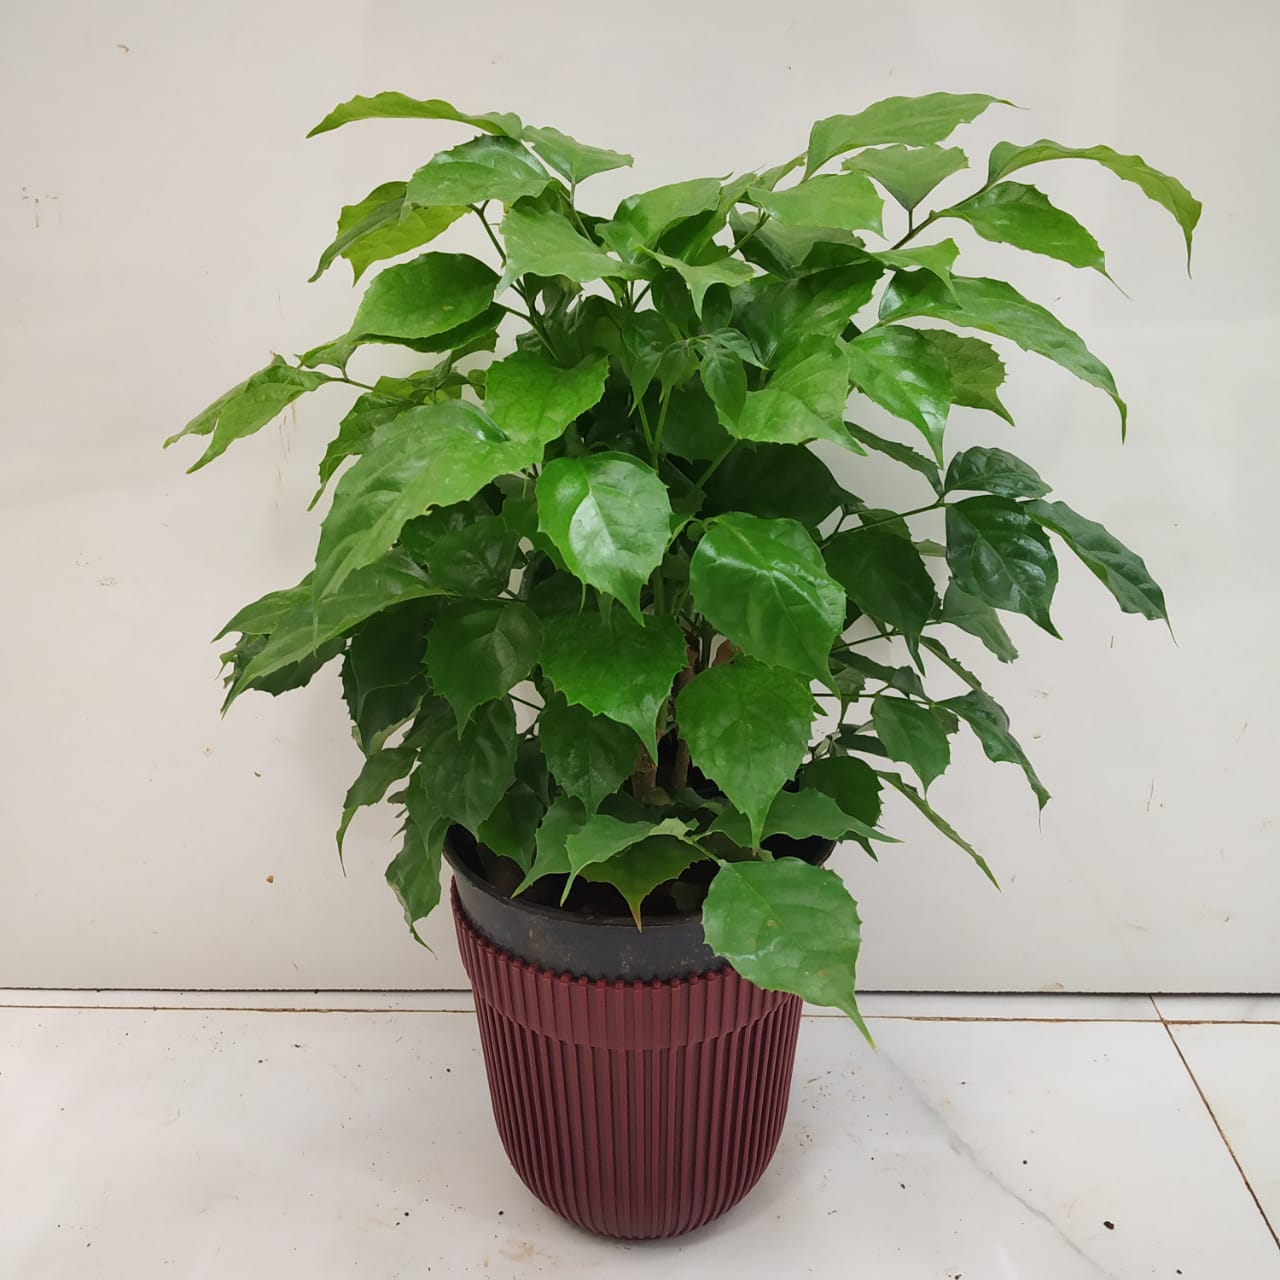 Home Garden Plant 50PCS Seeds Genuine Radermachera Sinica China Doll Emerald Tree Seeds Also for